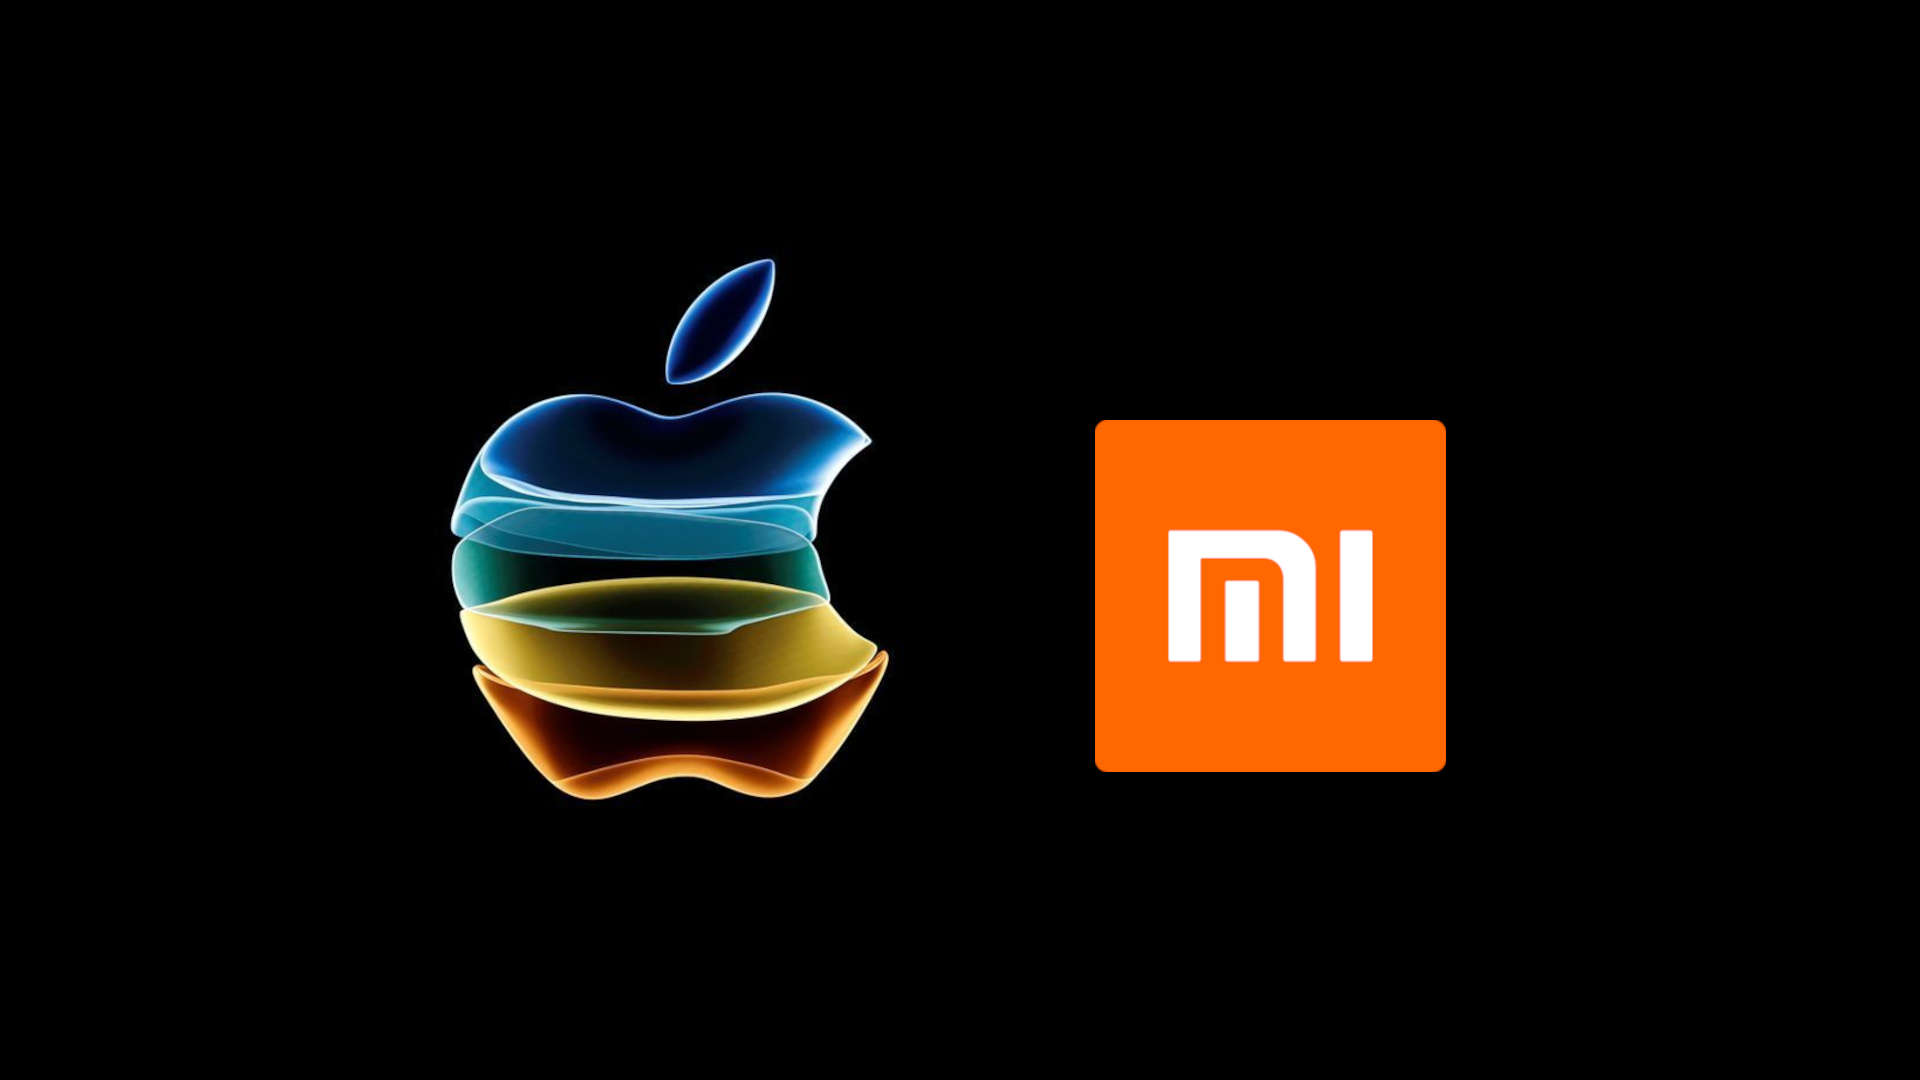 Xiaomi leapfrogs Apple to become second largest global OEM